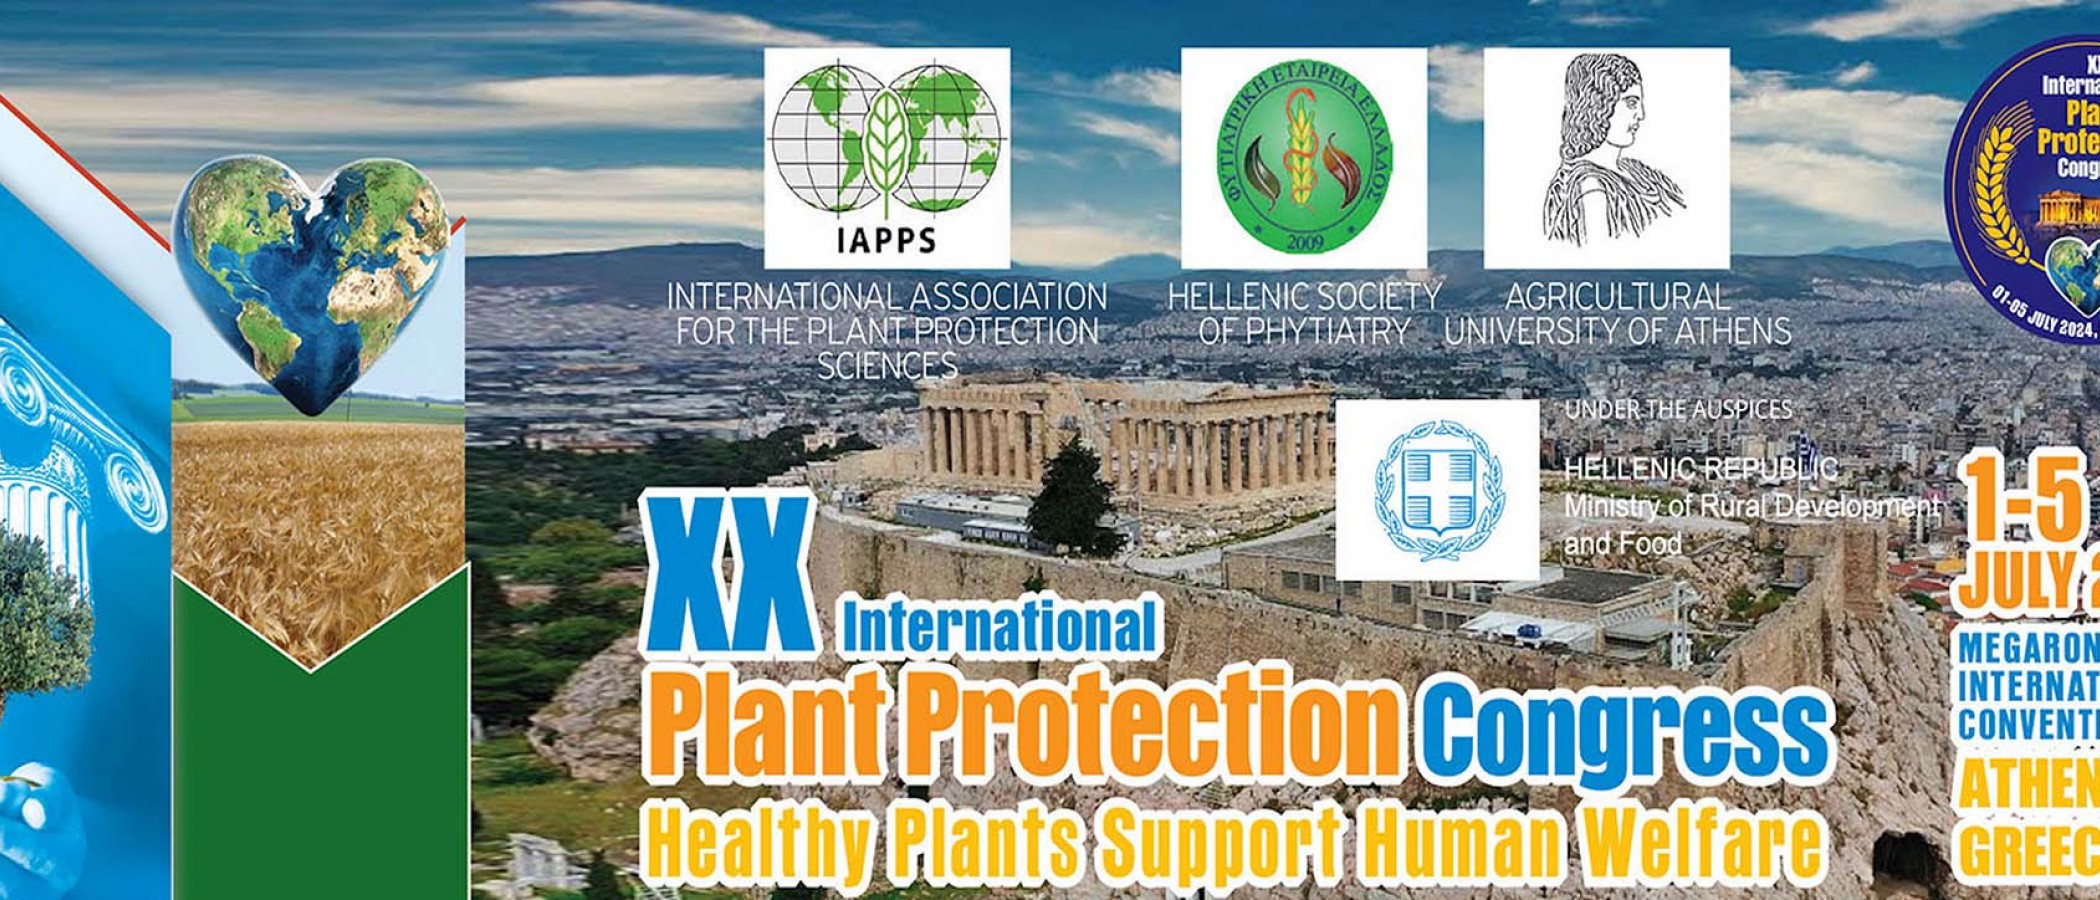 Organization of the XX International Plant Protection Congress under the auspices of the Agricultural University of Athens